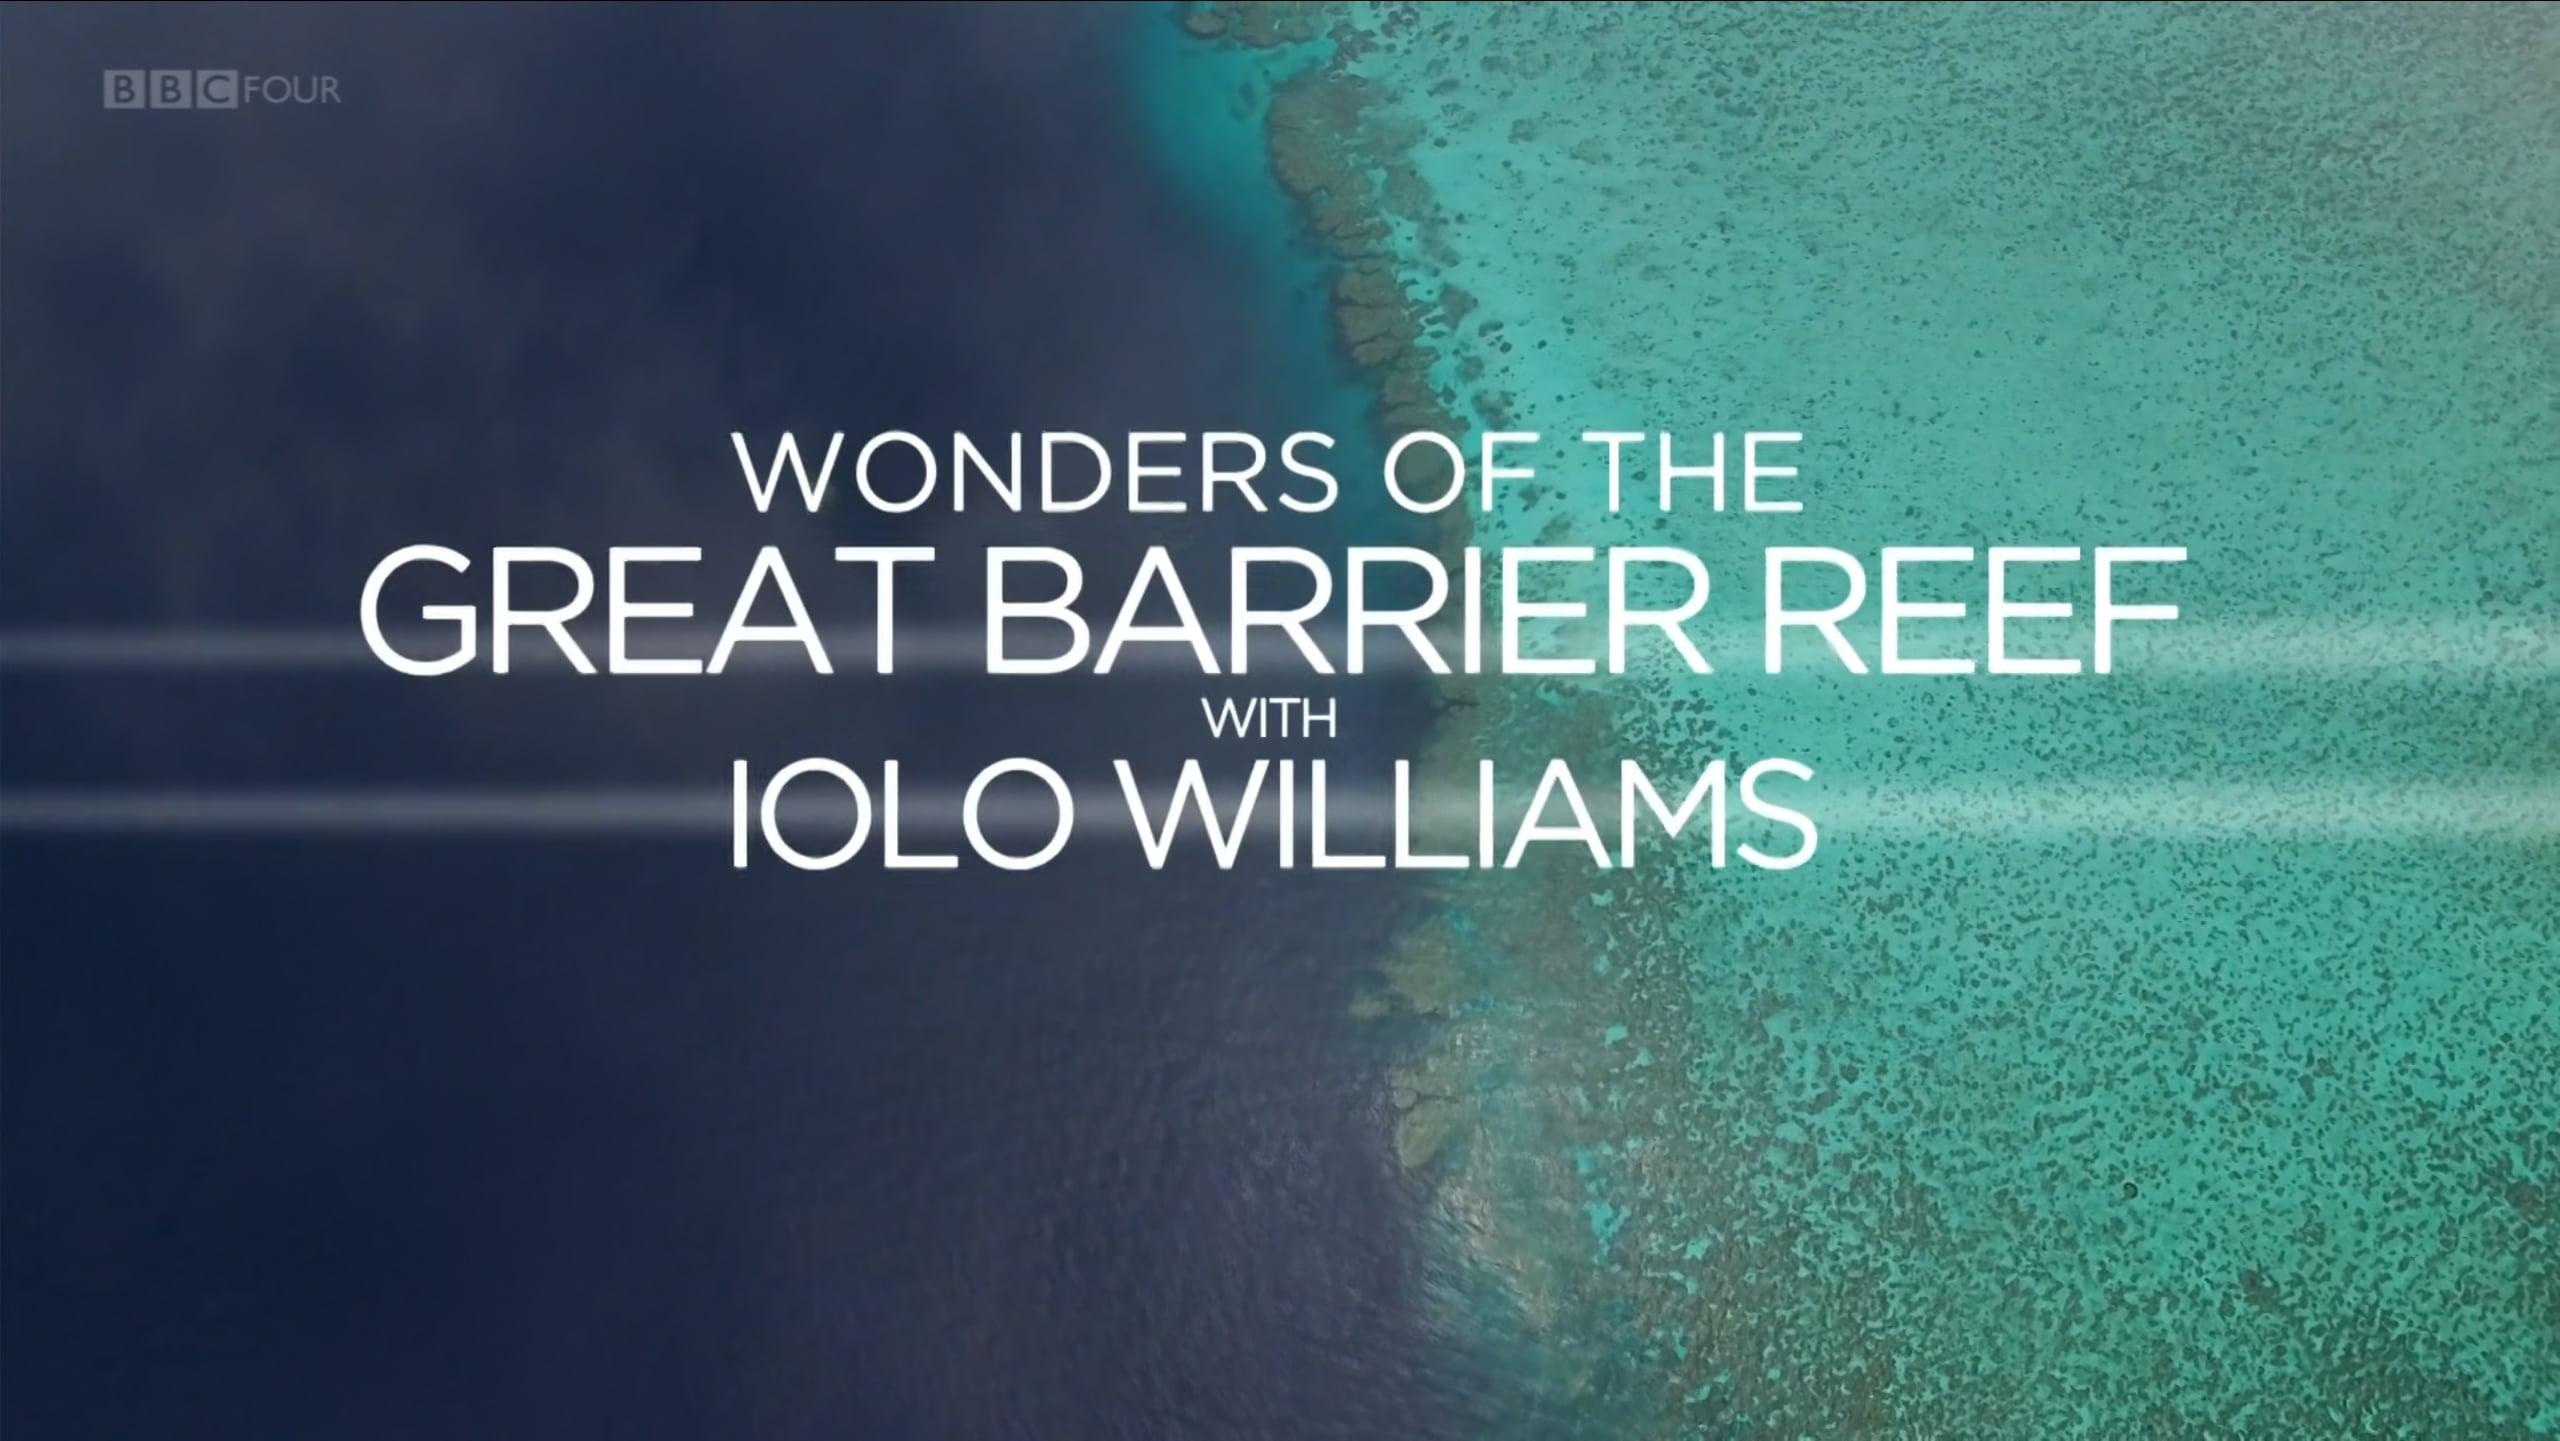 Wonders of the Great Barrier Reef with Iolo Williams backdrop